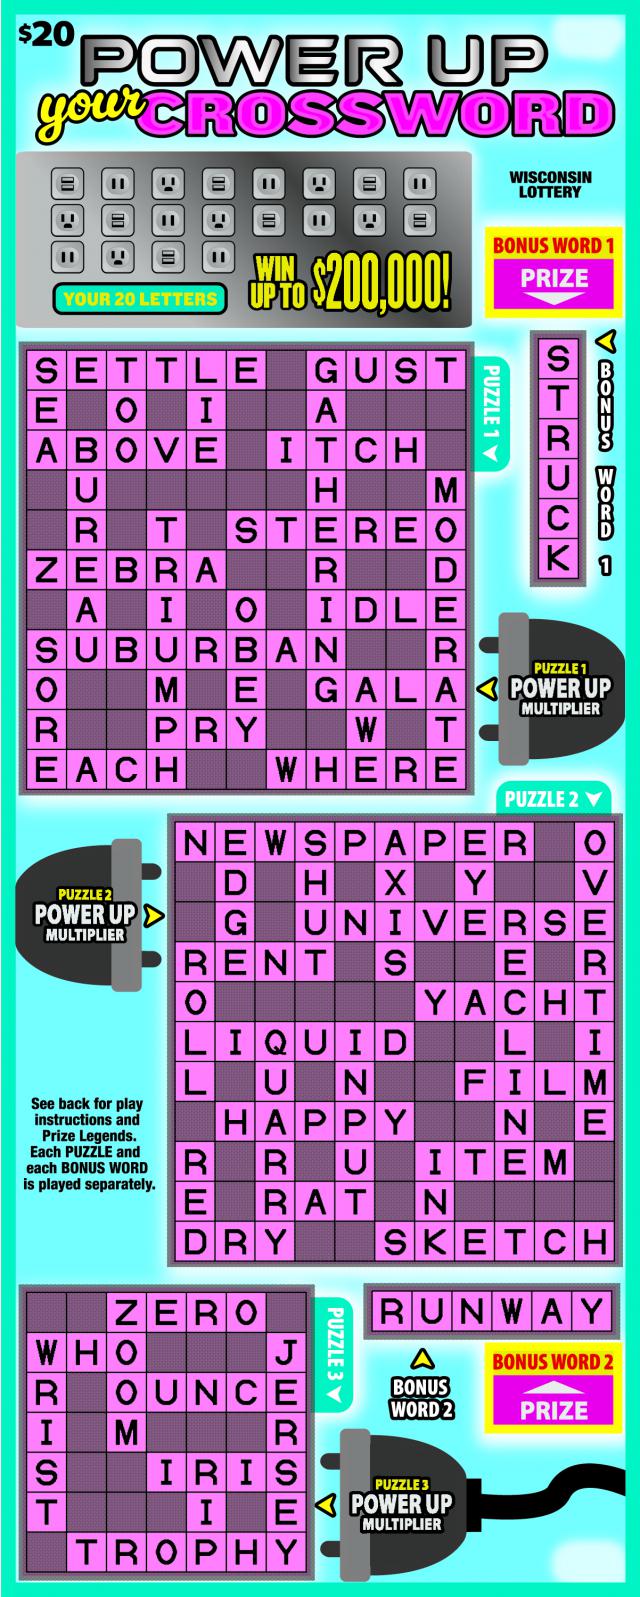 Power Up Your Crossword (2131) Wisconsin Lottery